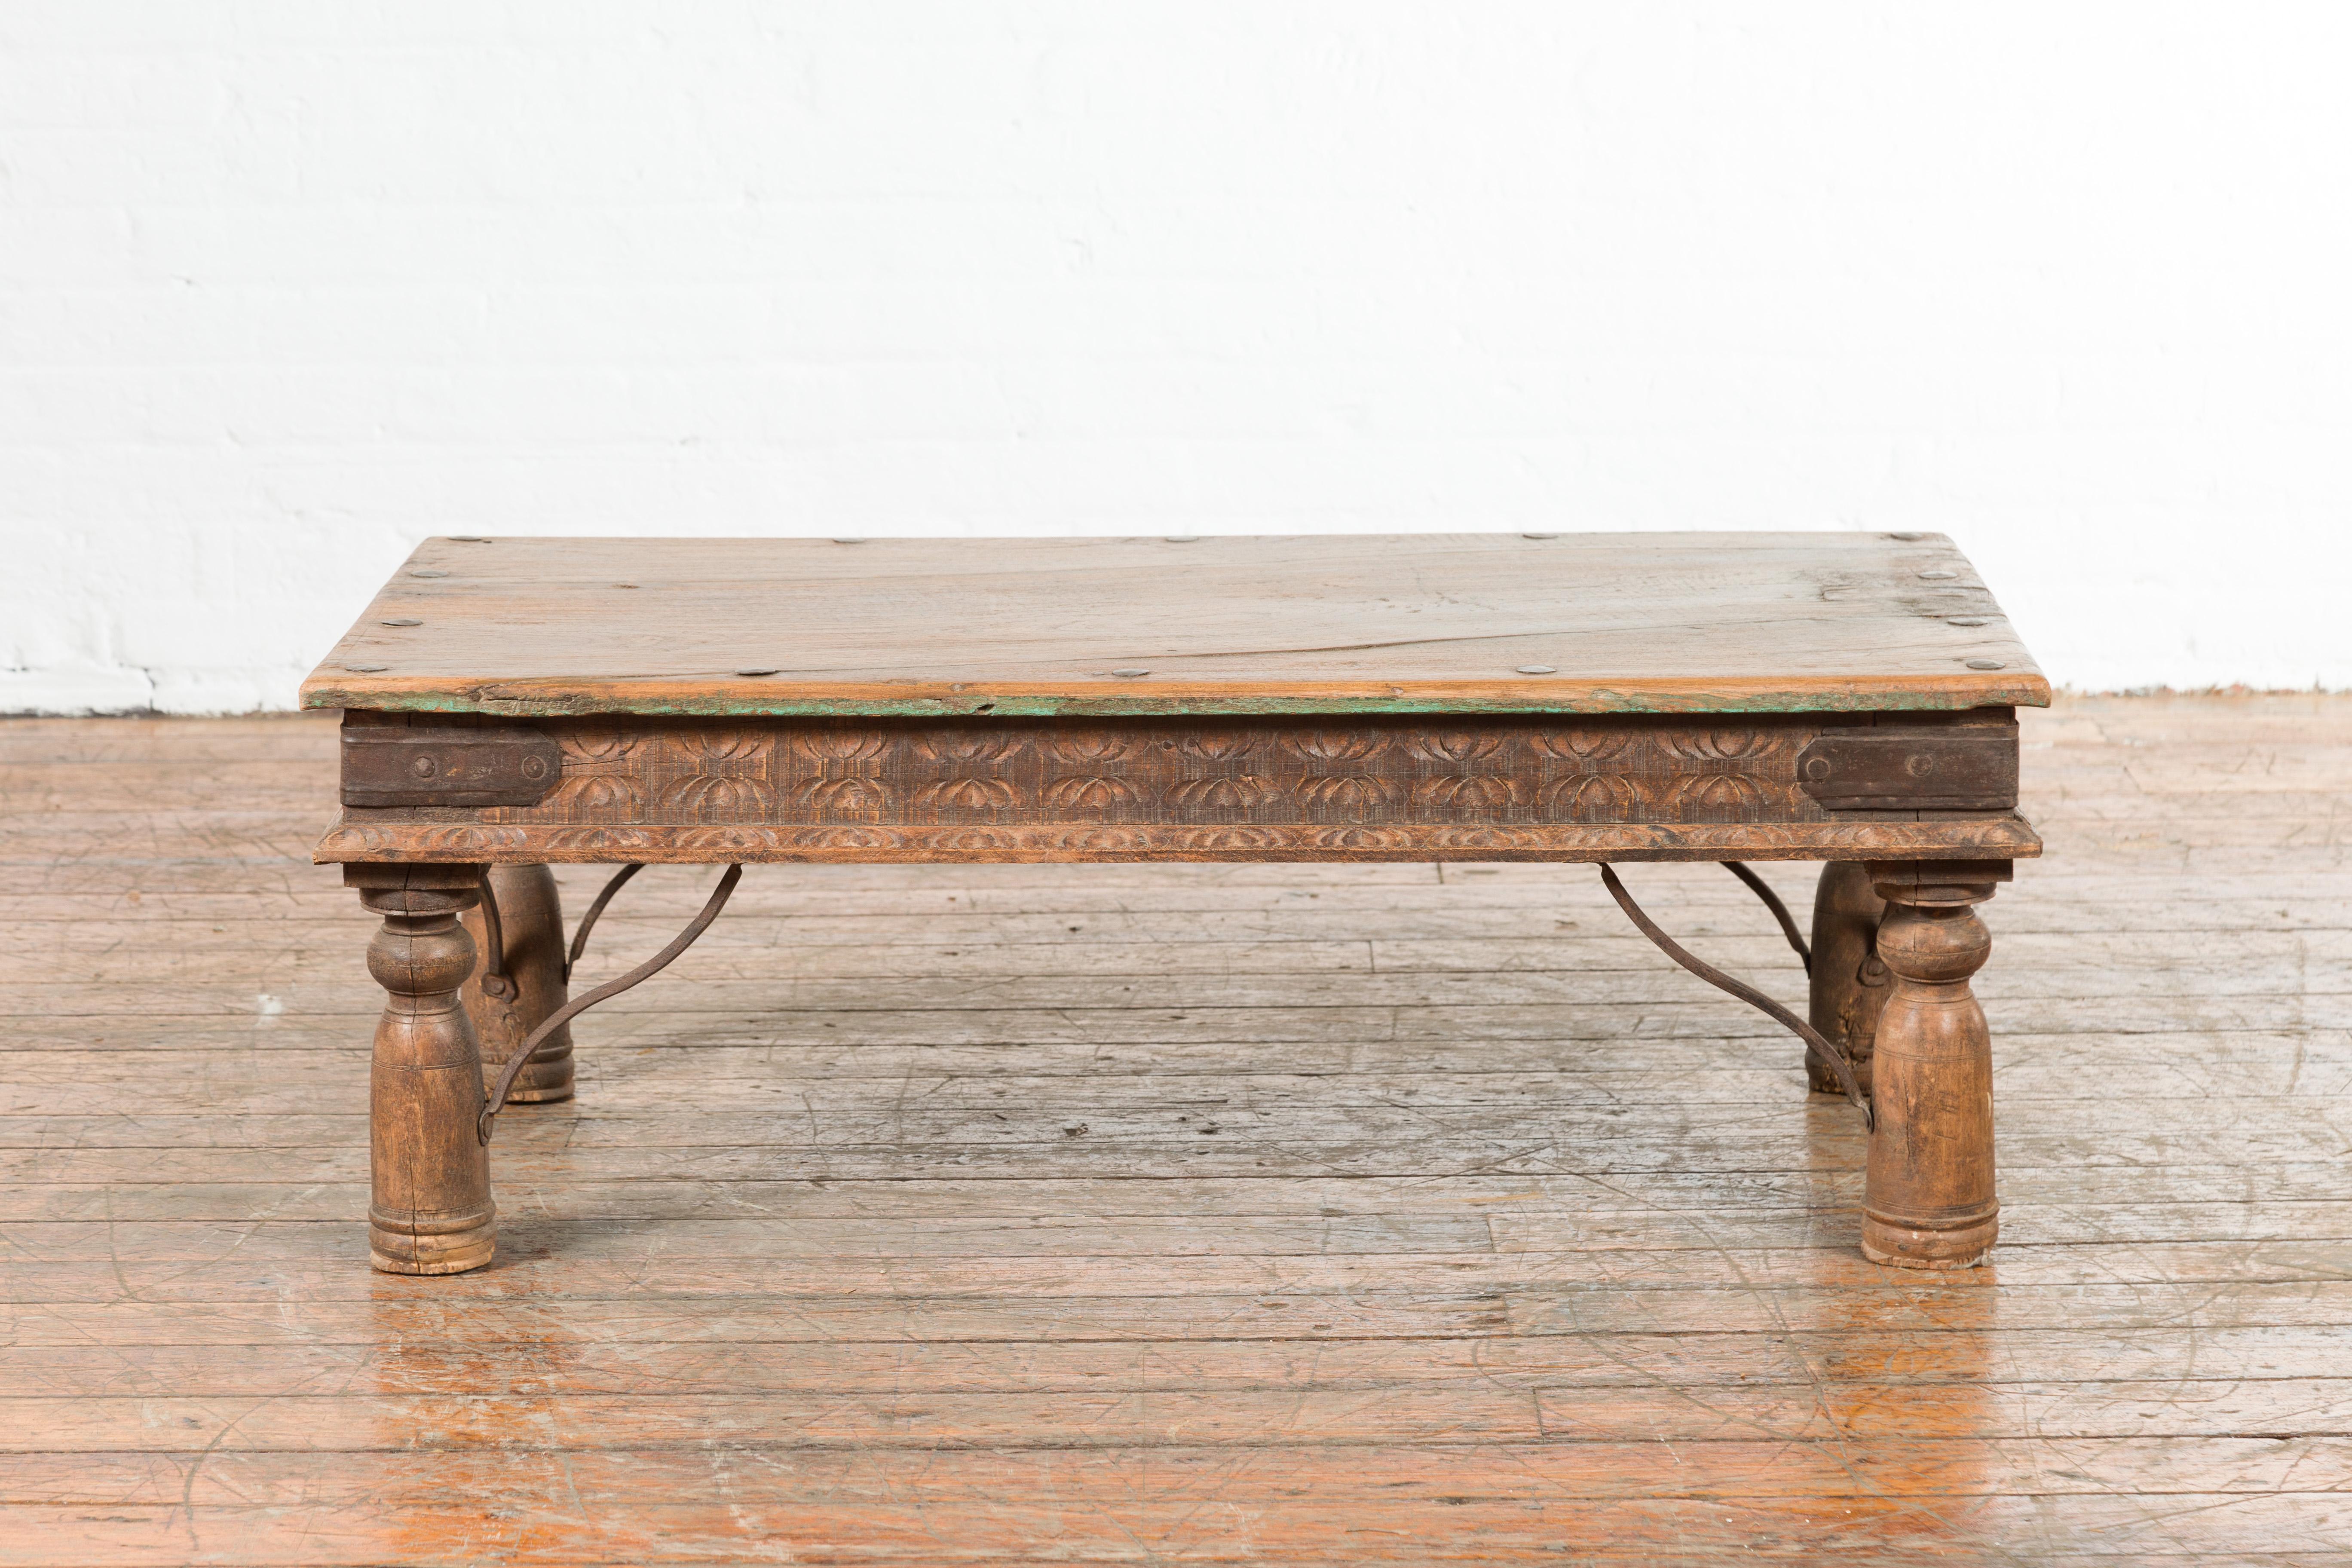 19th Century Indian Rustic Coffee Table with Iron Accents and Carved Apron 5